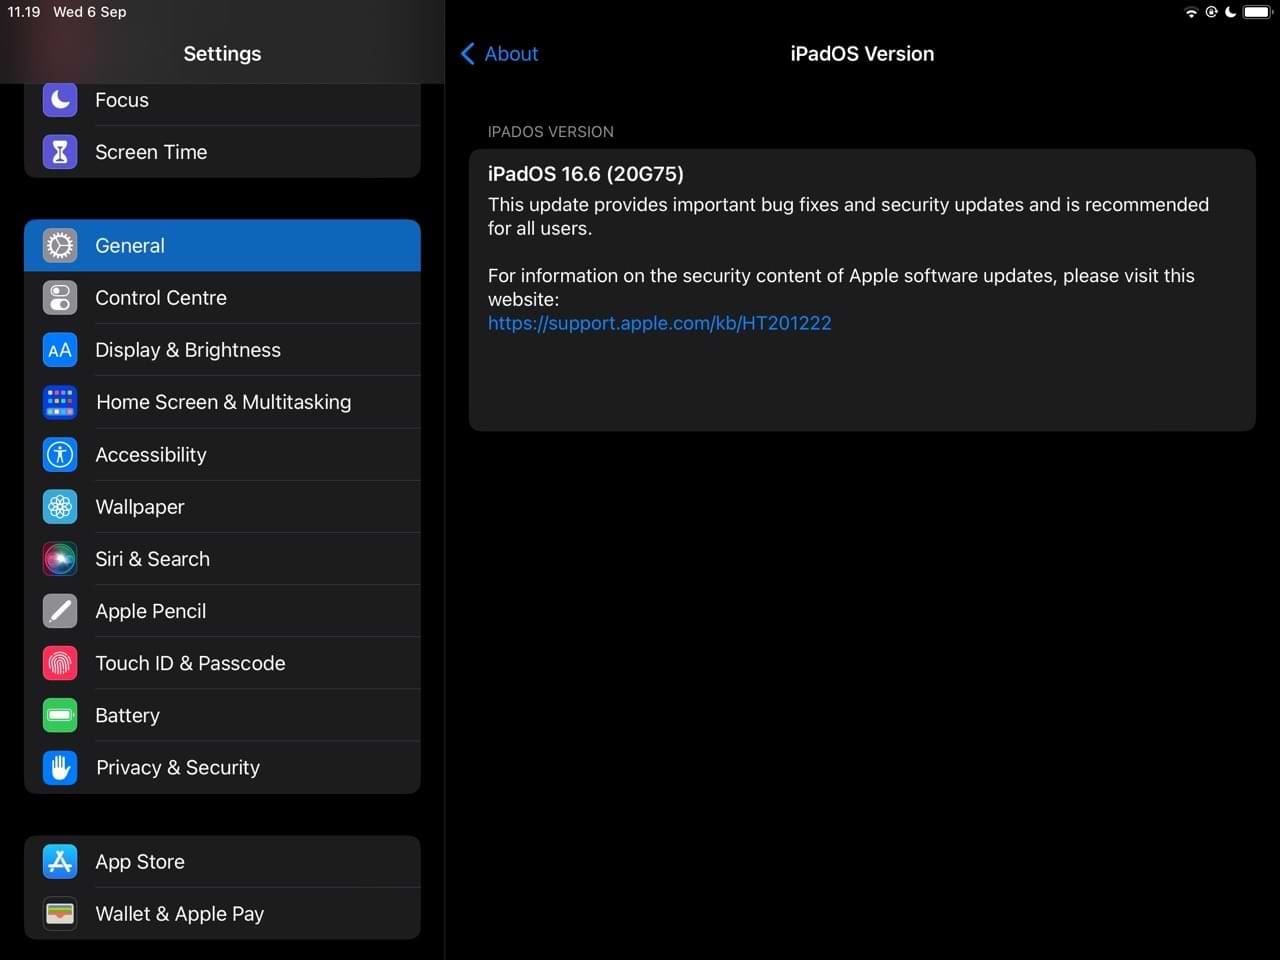 Check the current version of iPadOS in Settings